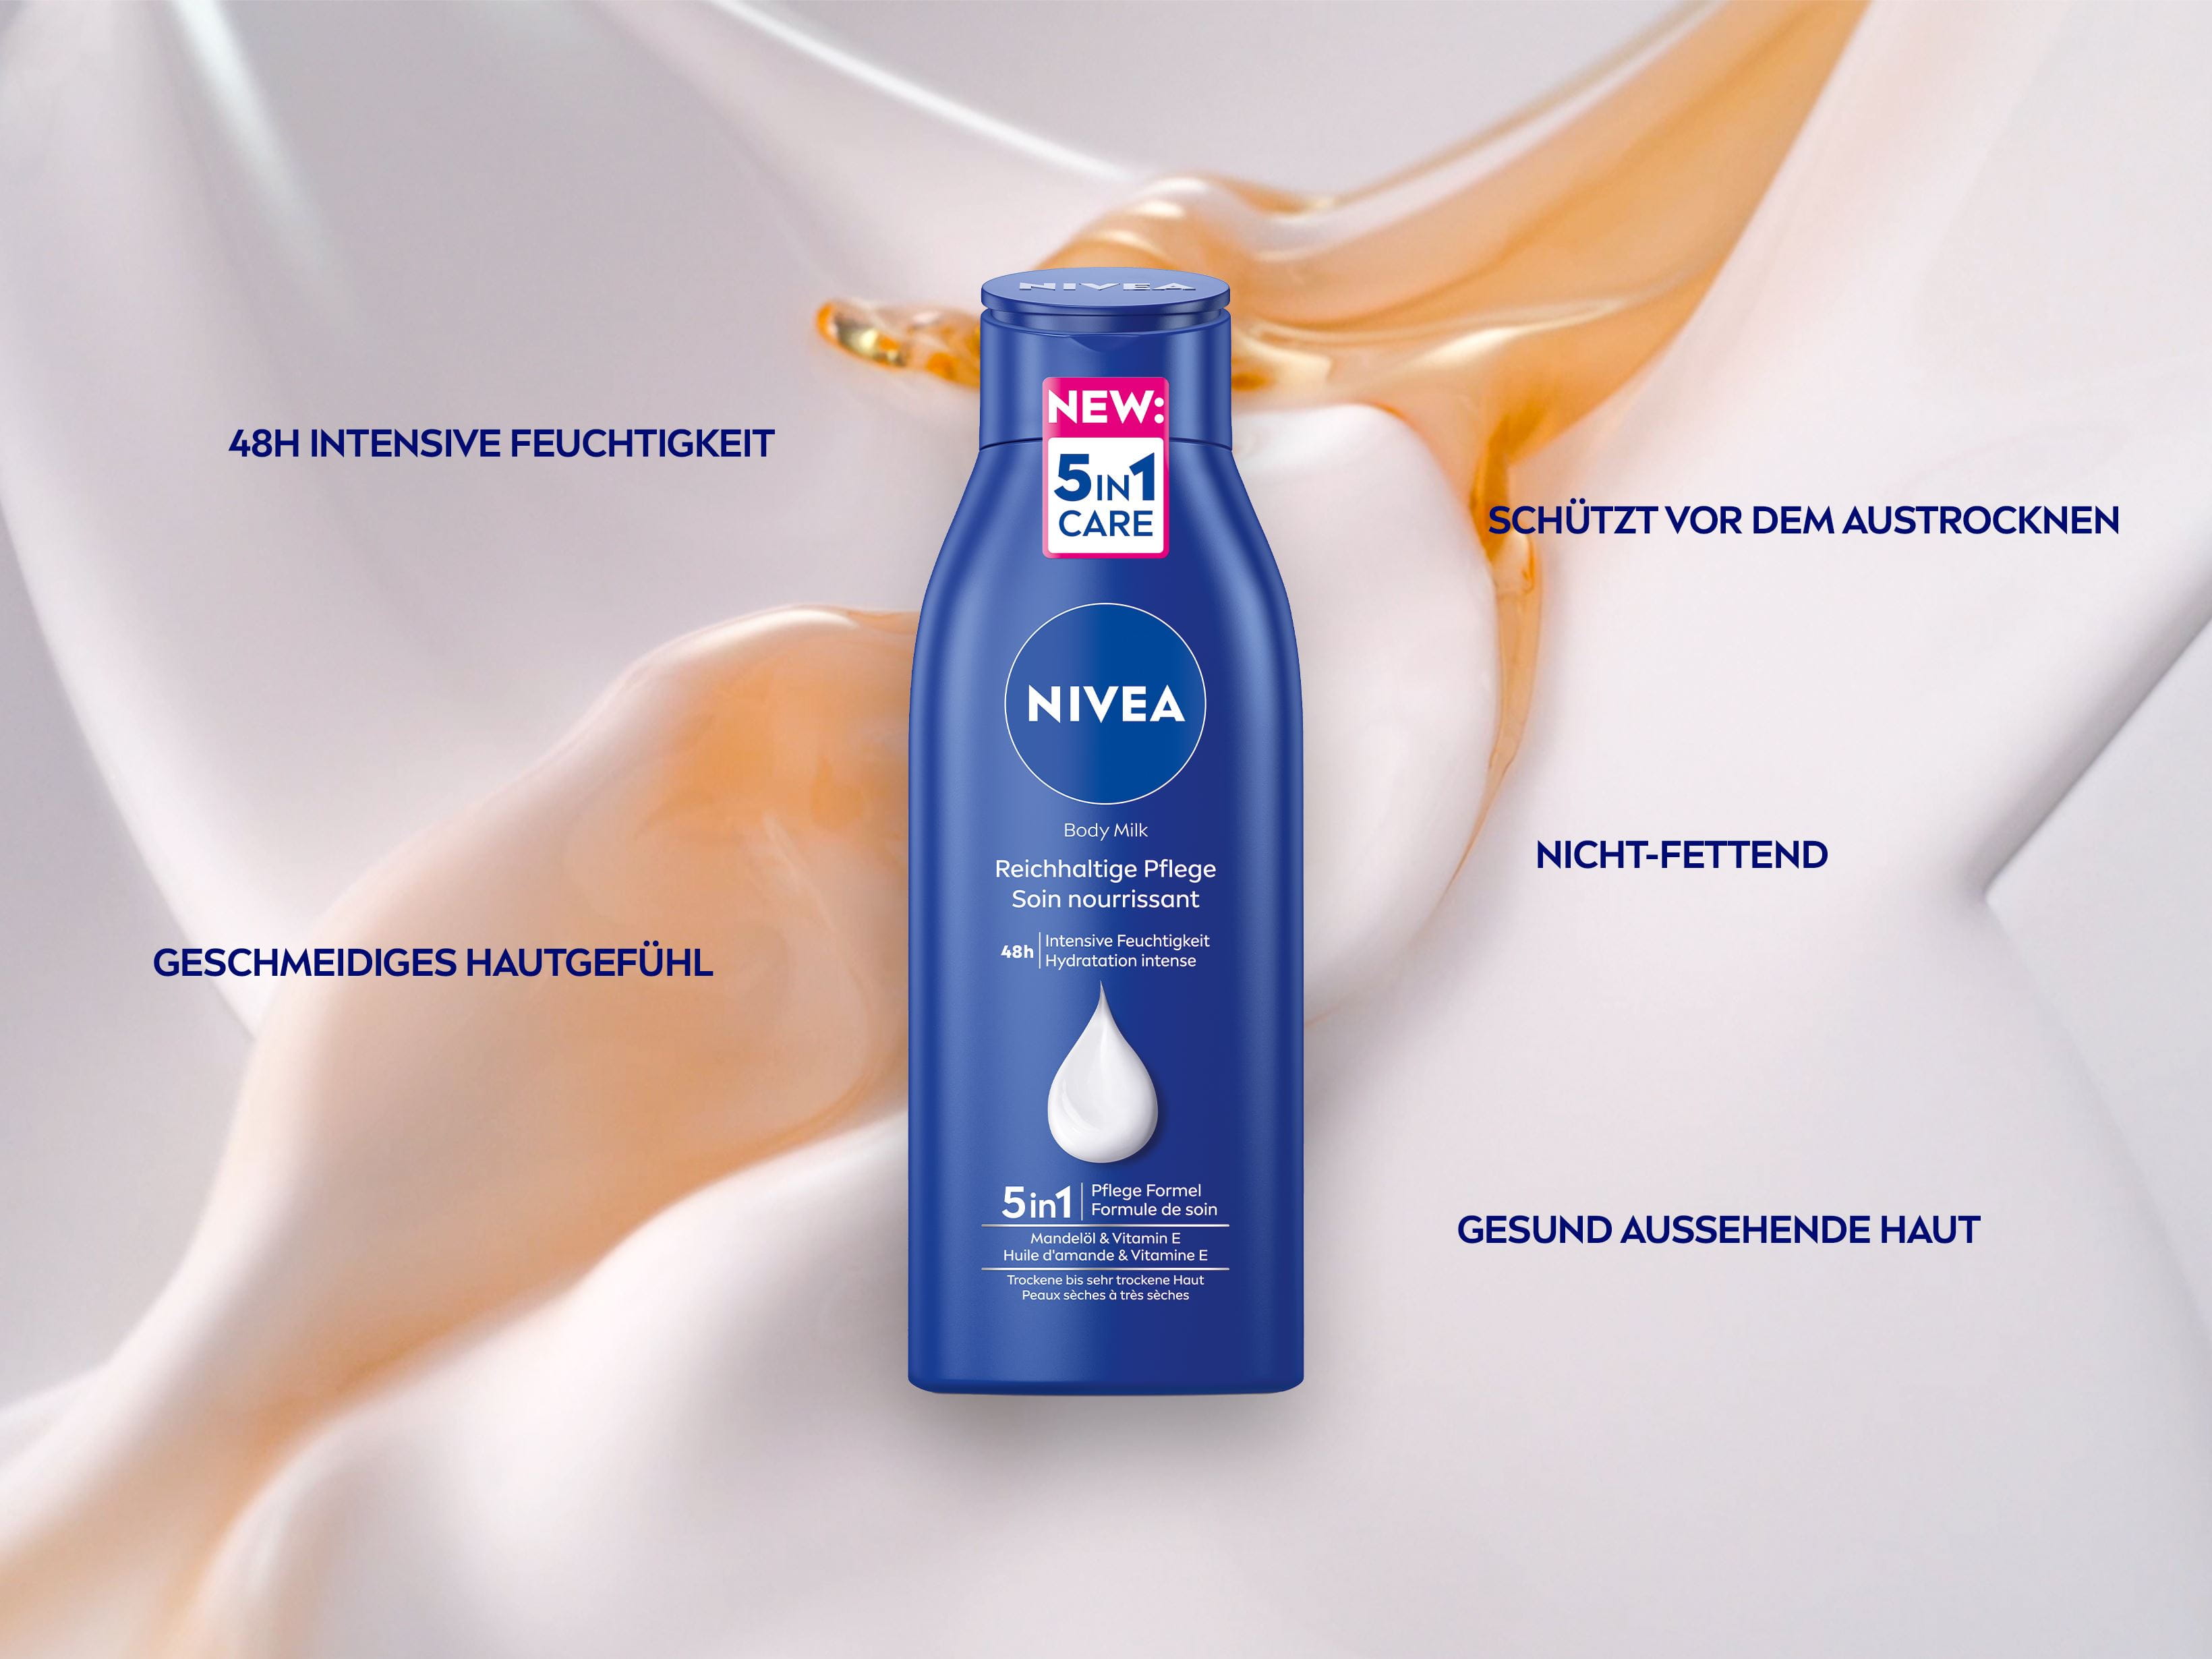 You can see here how NIVEA body moisturizer takes care of your dry skin.